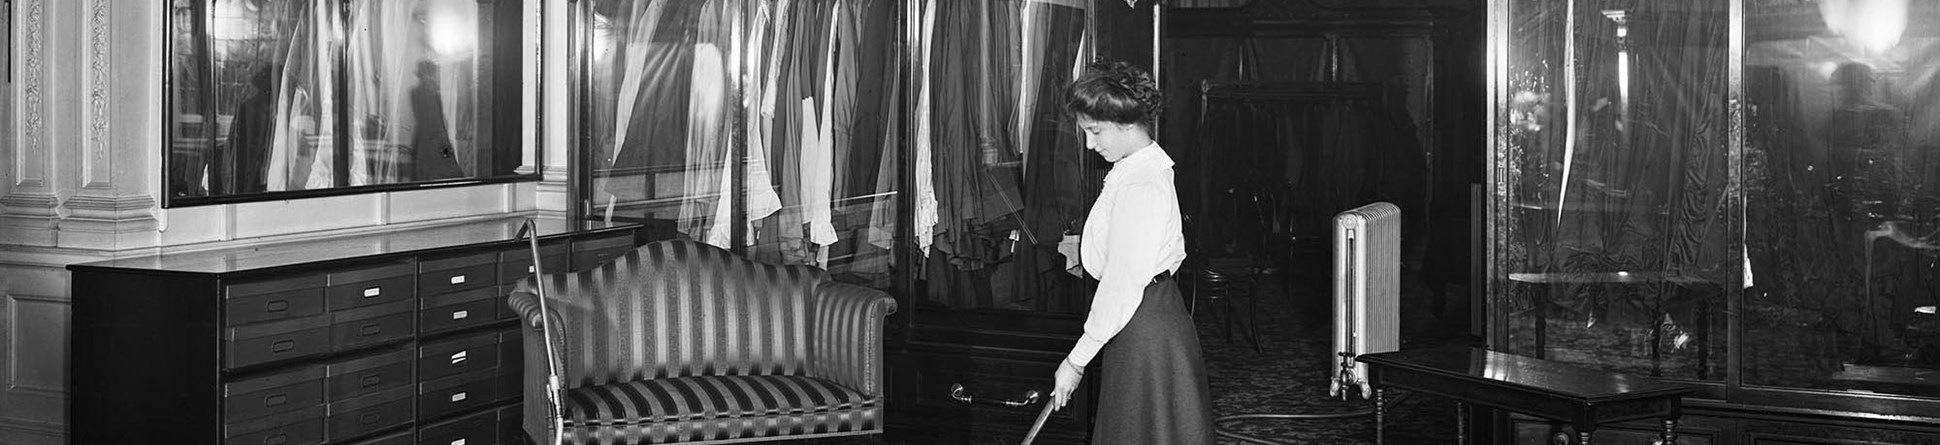 A female shop worker operating a vacuum cleaner